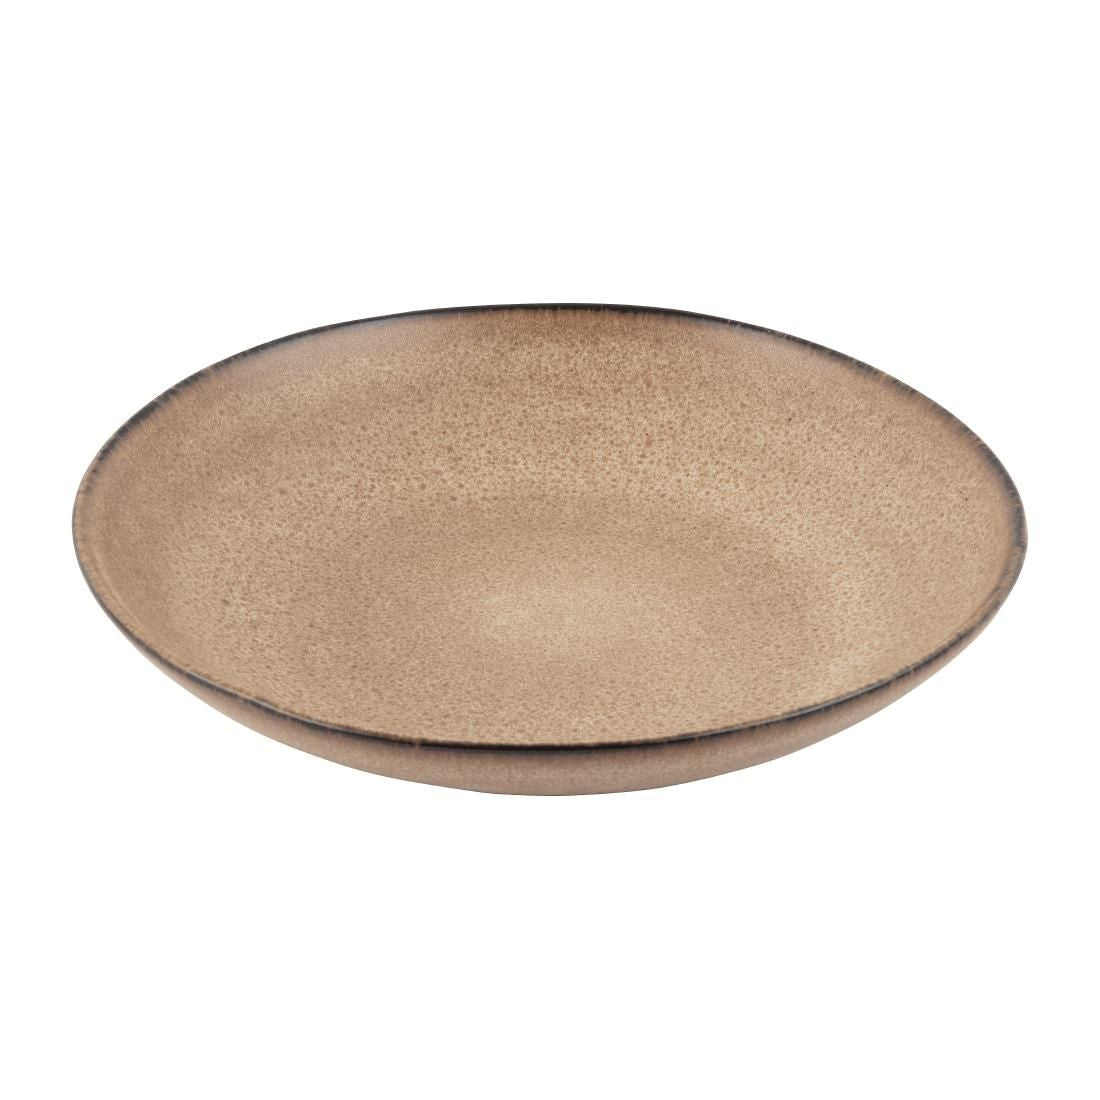 FC735 Olympia Build-a-Bowl Earth Flat Bowls 250mm (Pack of 4) JD Catering Equipment Solutions Ltd